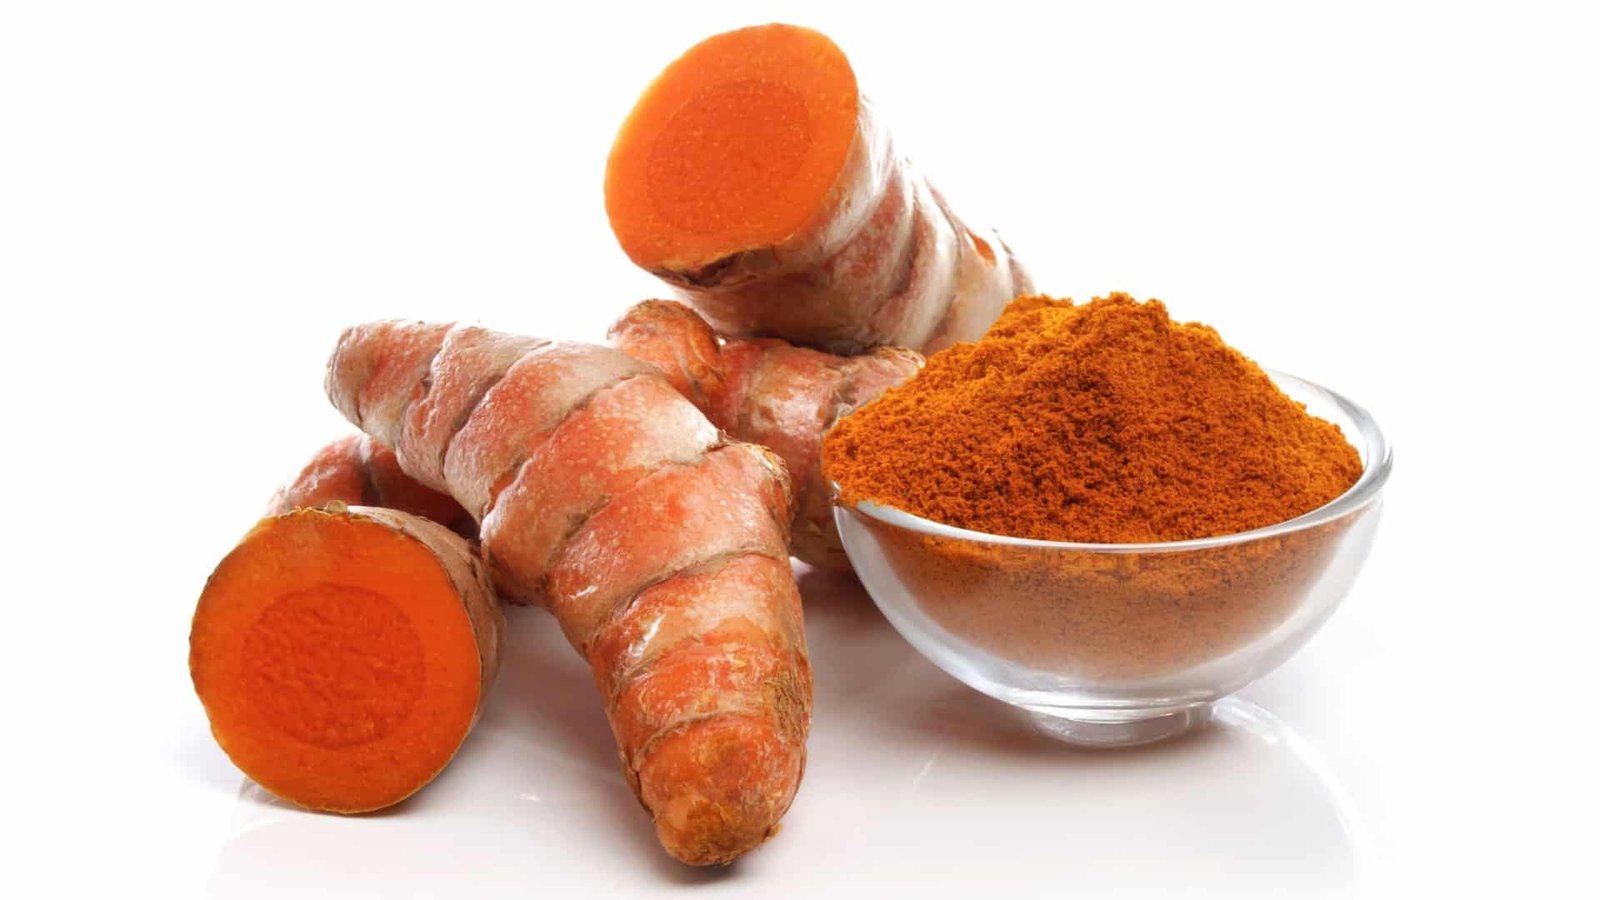 natures-way-launches-turmeric-based-supplements